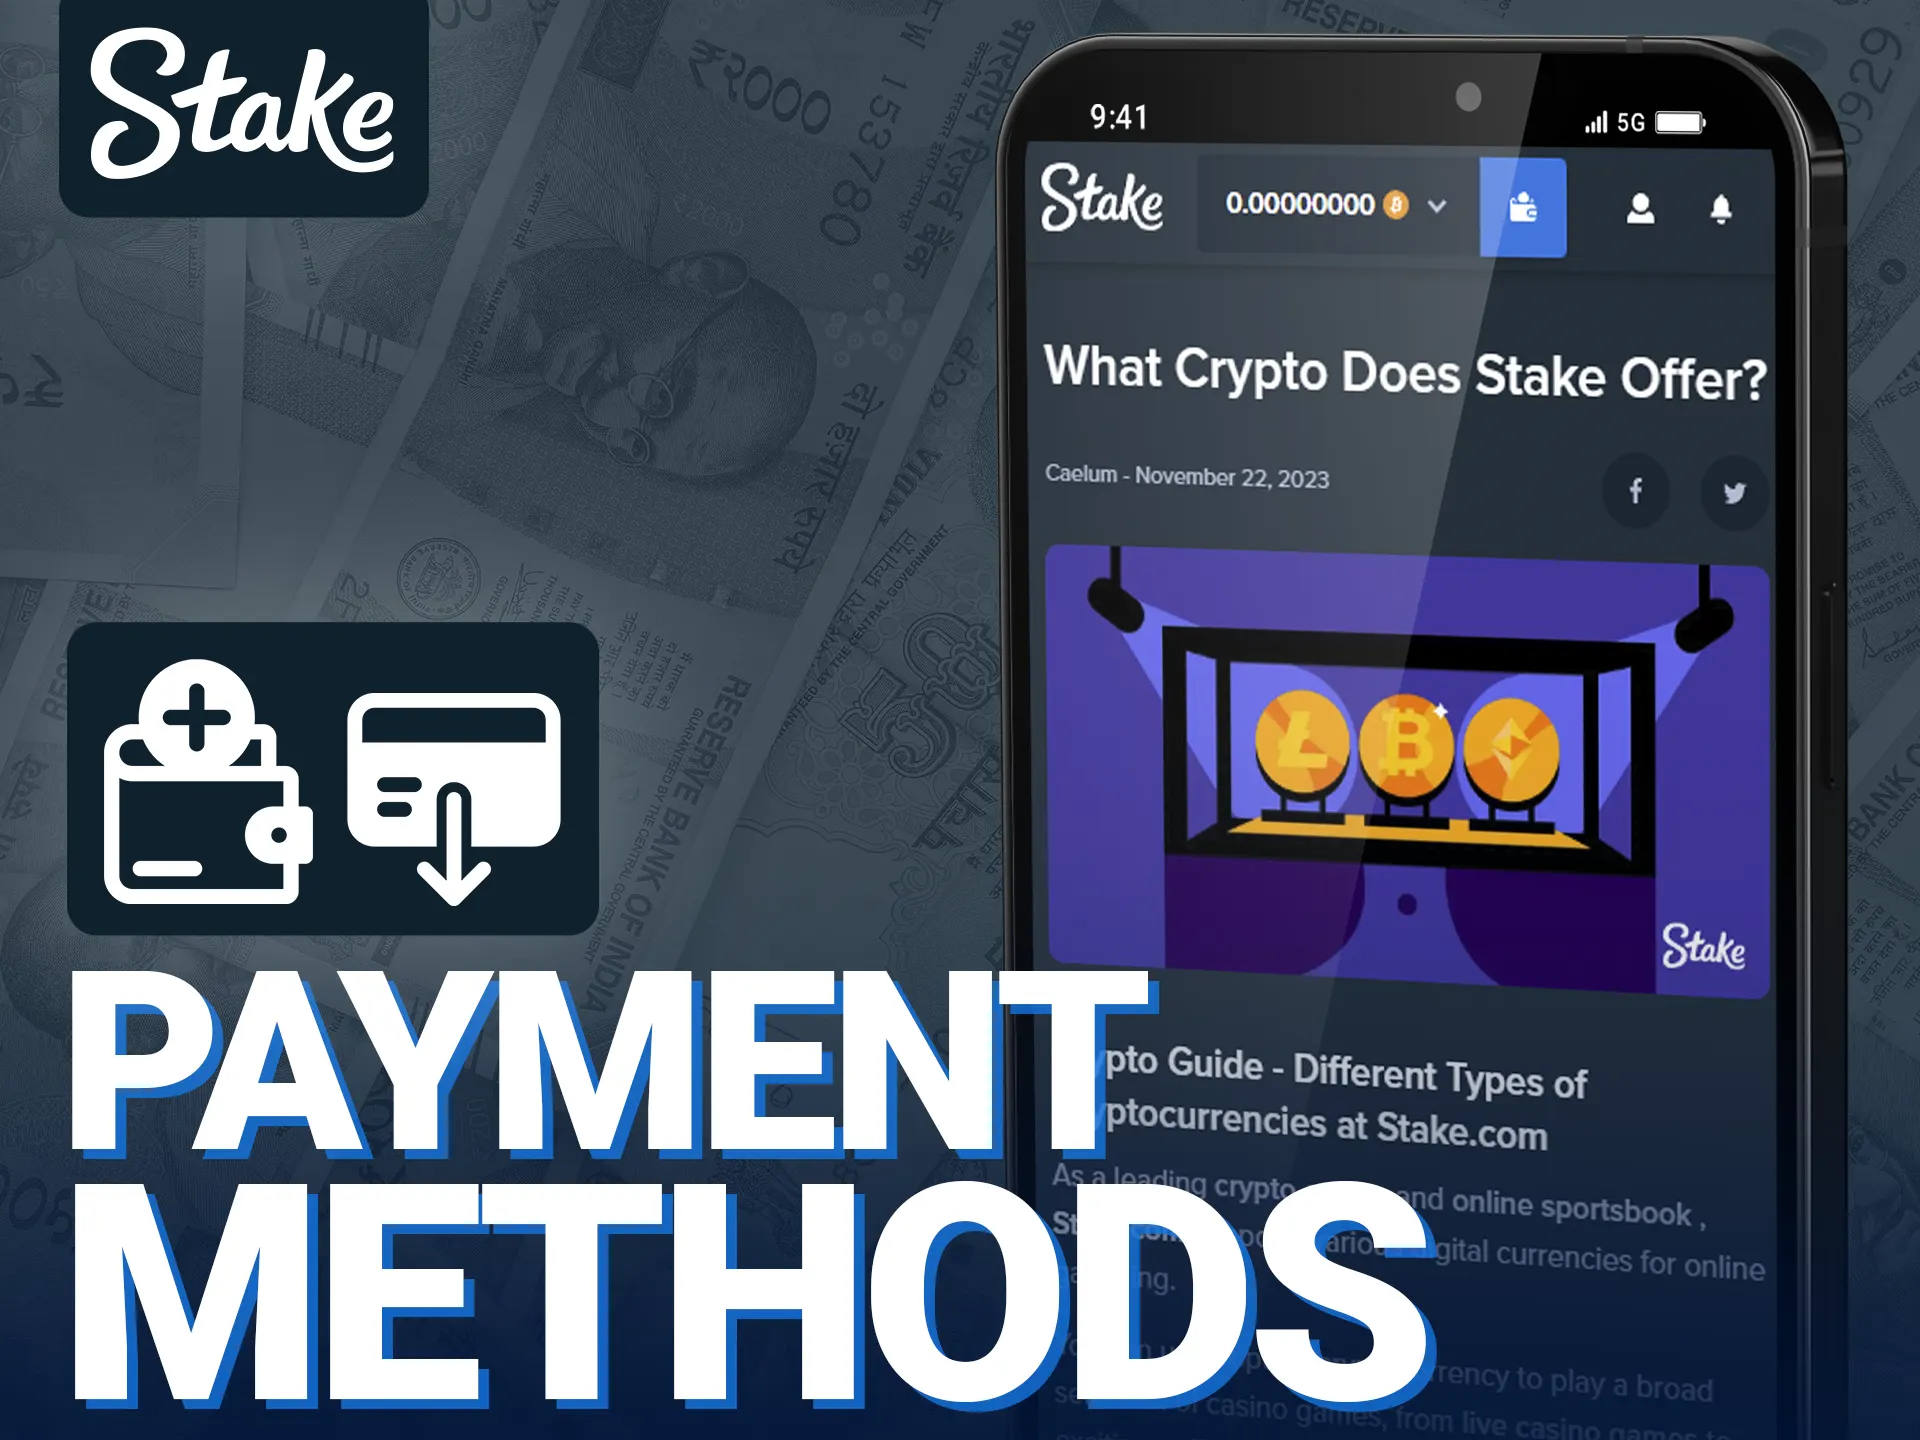 Stake Casino app supports various cryptocurrency payments.